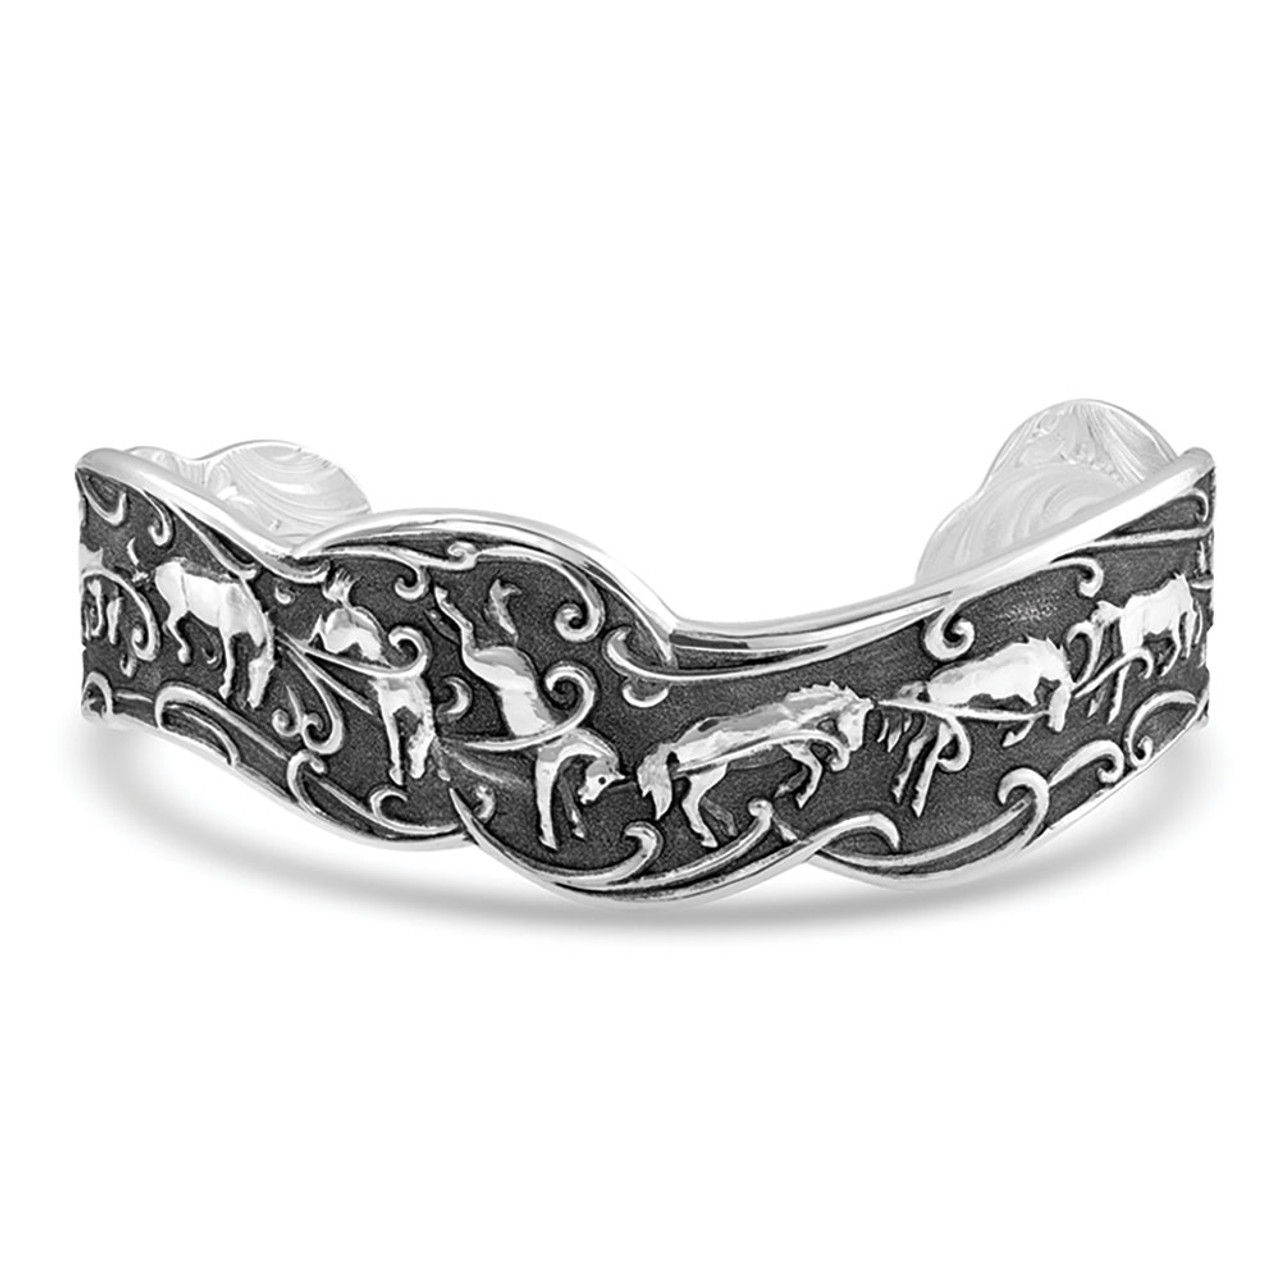 Montana Silversmiths Curio Finish Western Lace Turquoise Cuff Bracelet,  BC2106VC - Wilco Farm Stores